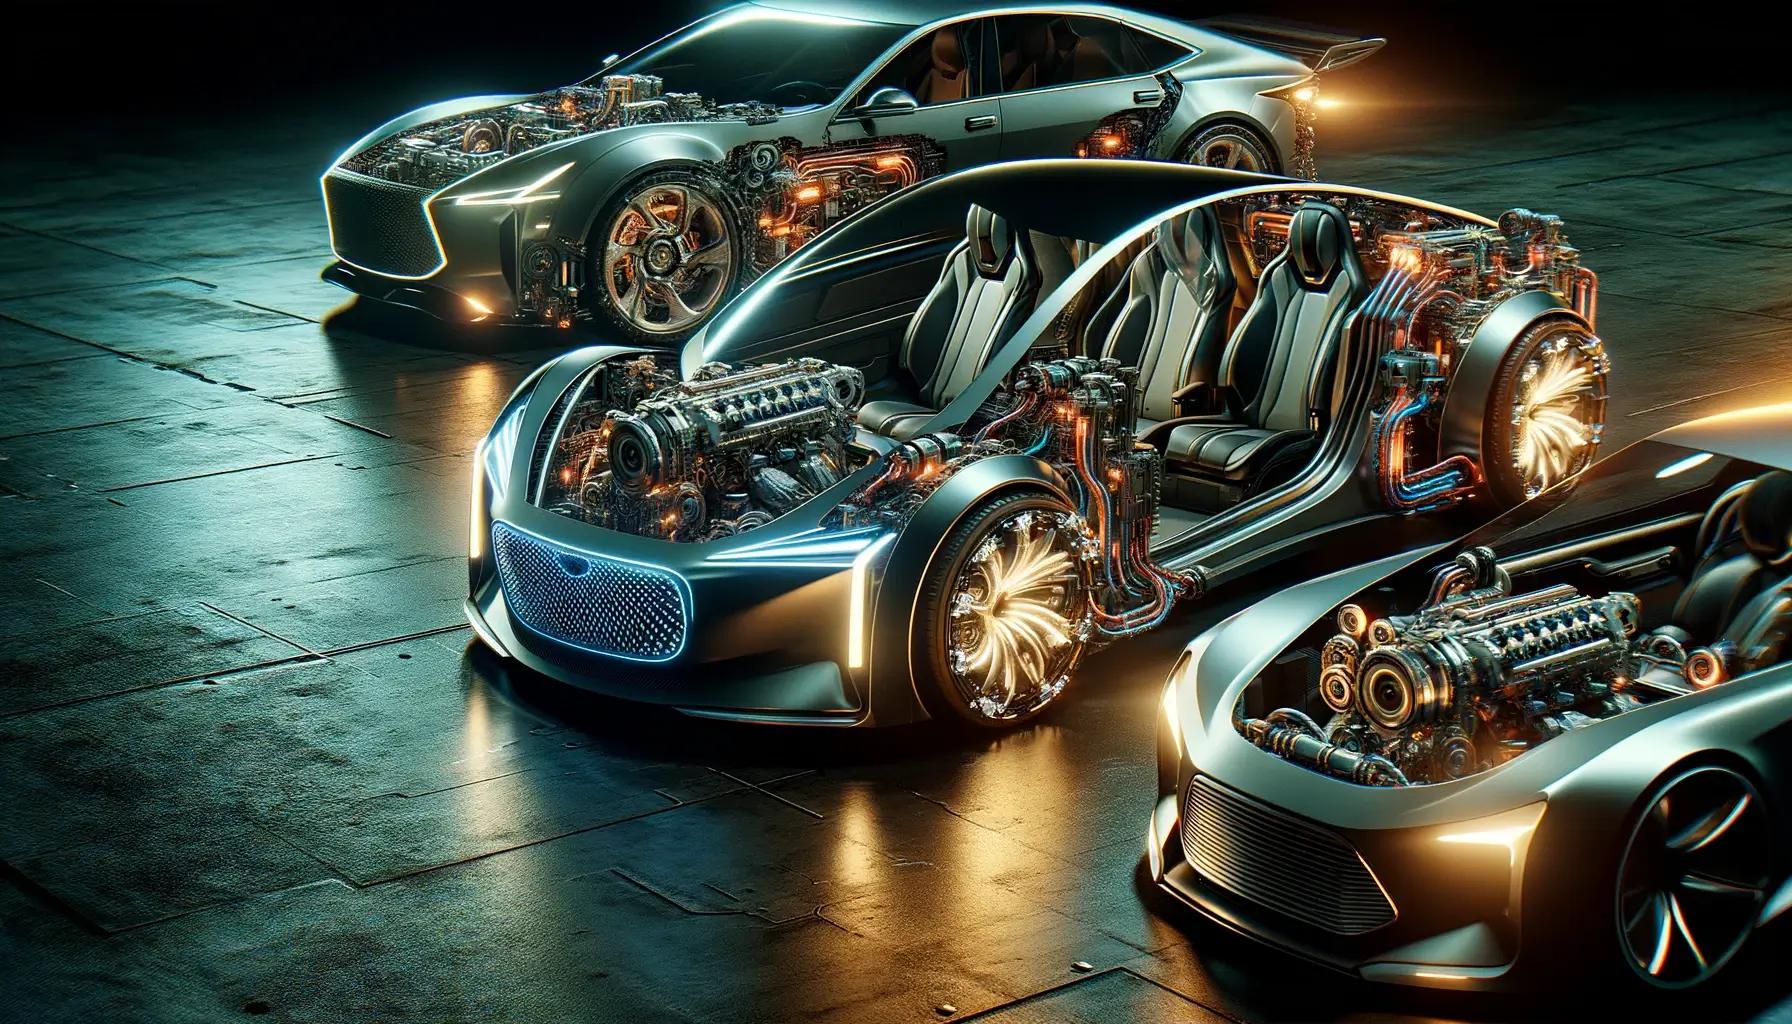 A trio of futuristic cars with transparent chassis revealing intricate hybrid engines, showcased on a dimly lit showroom floor, reflecting advanced automotive engineering and design.